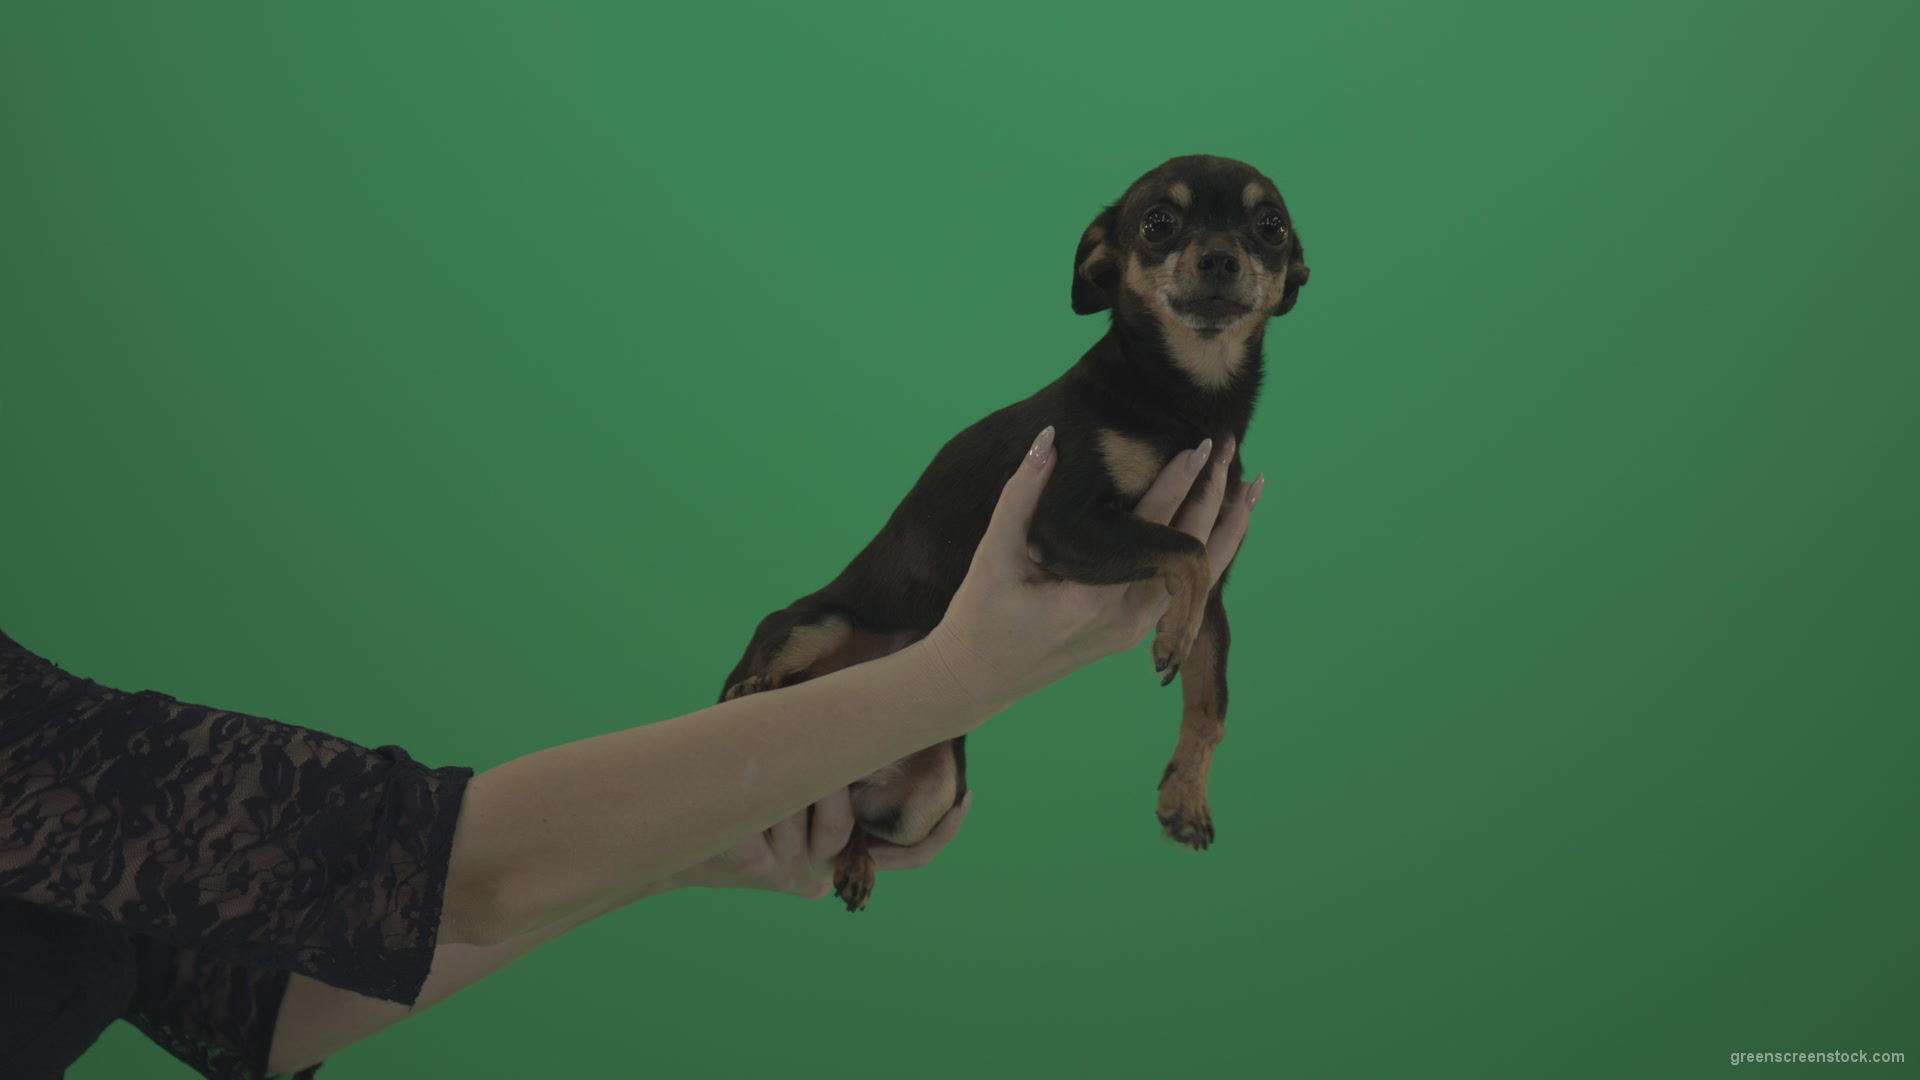 Black-funny-Chihuahua-small-dog-in-female-hands-on-green-screen_002 Green Screen Stock